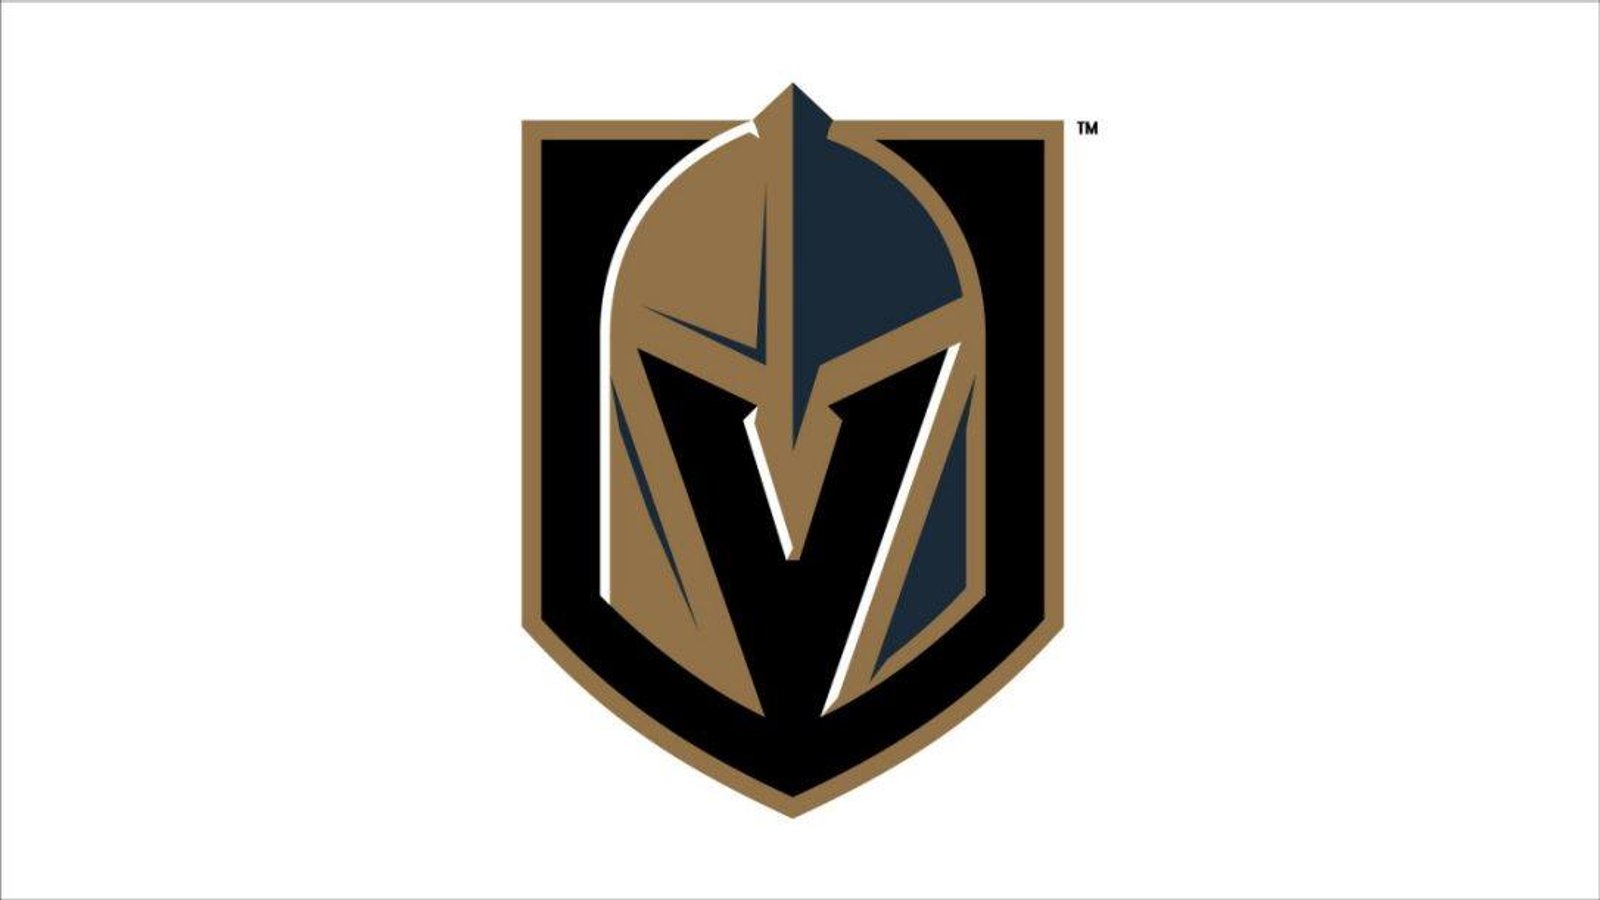 NHL's use of “Golden Knights” reportedly under review by the U.S. Army.